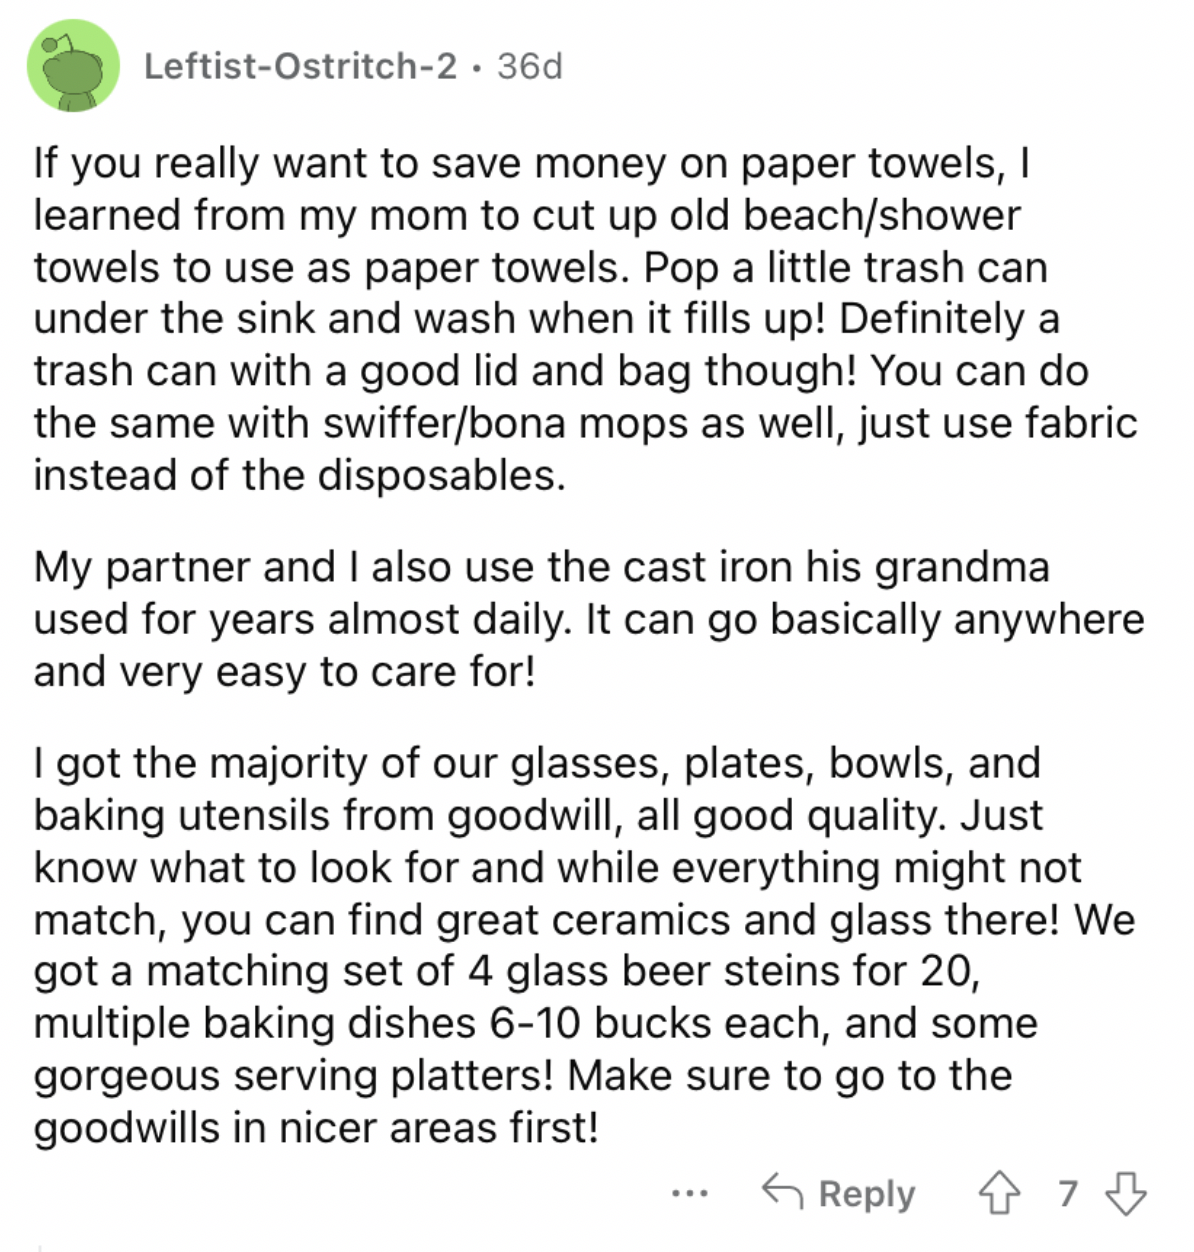 Reddit screenshot about the value of saving money on paper towels.